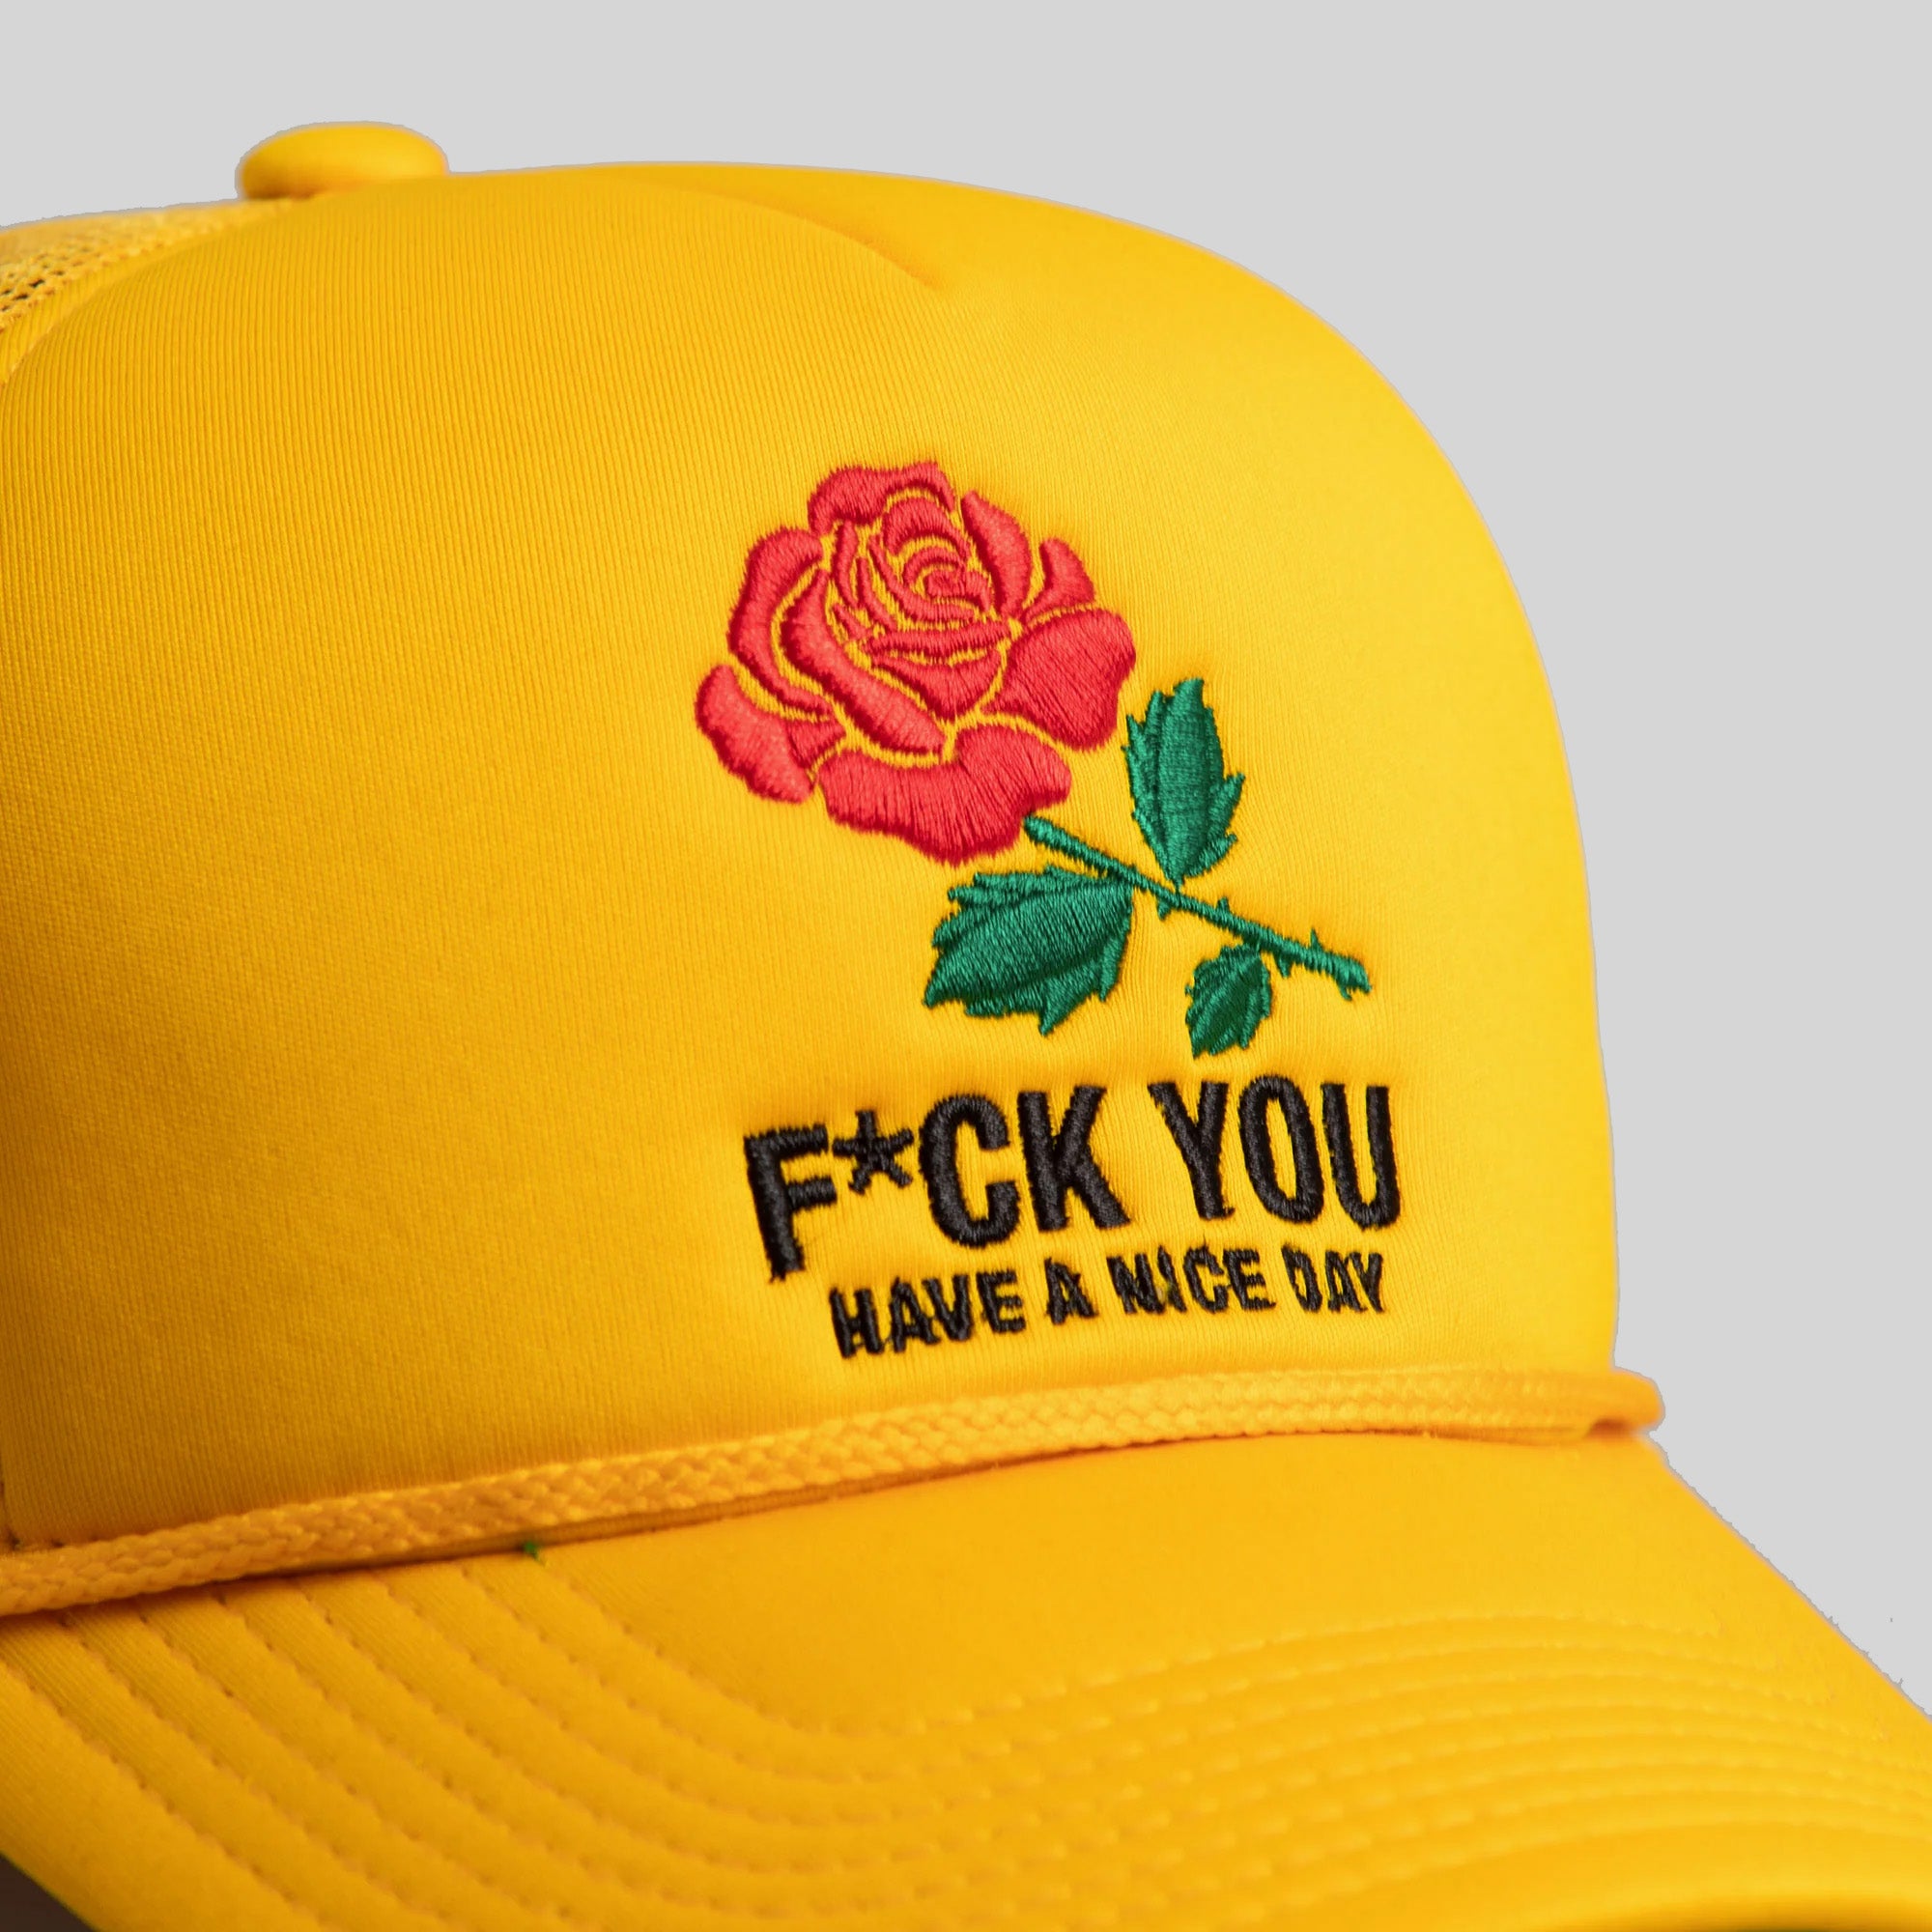 HAVE A NICE DAY YELLOW TRUCKER HAT